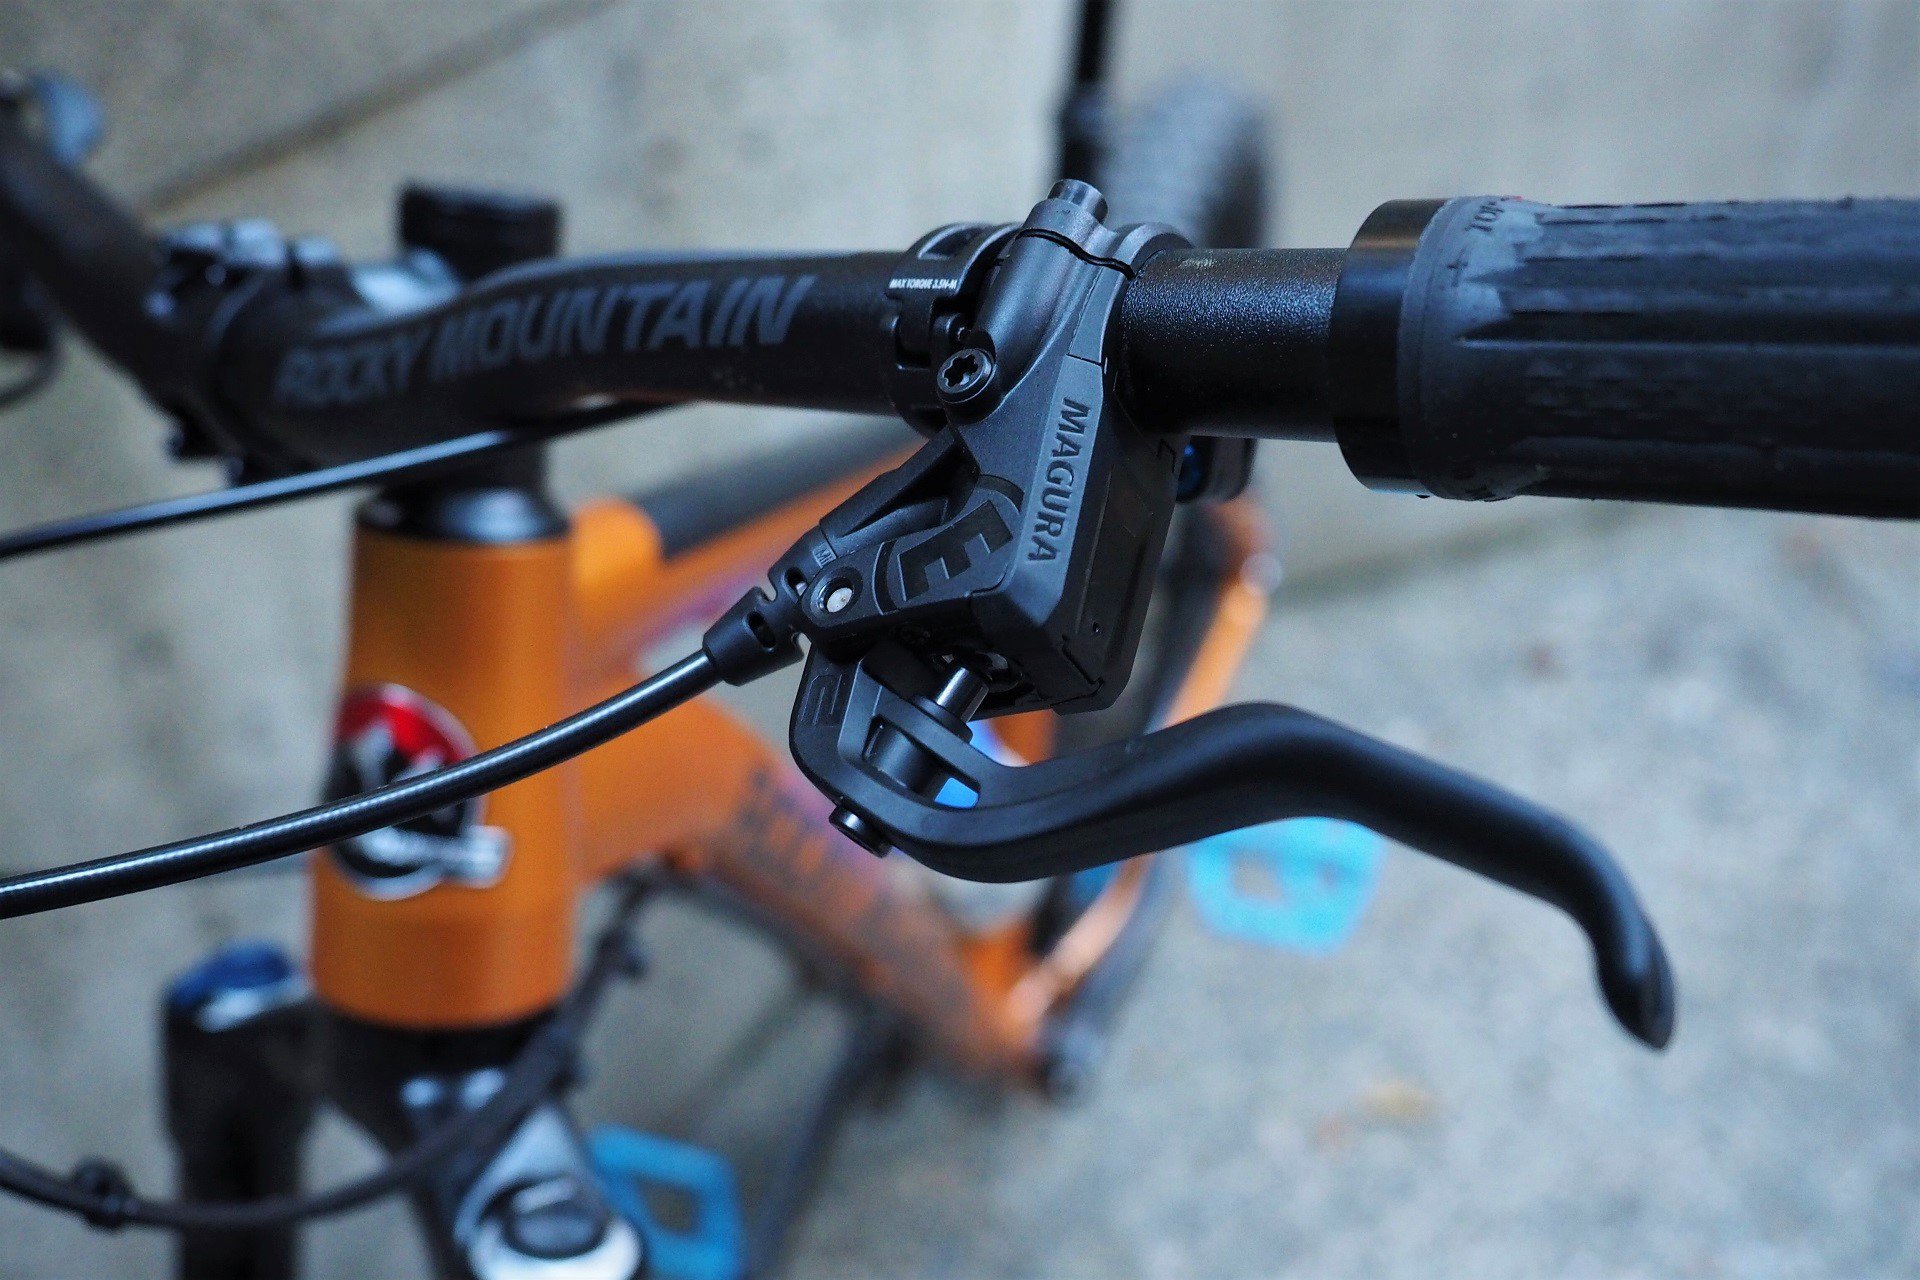 Long Term Test Review – Magura MT5 Brakes by Nate-at-BikeCo-com